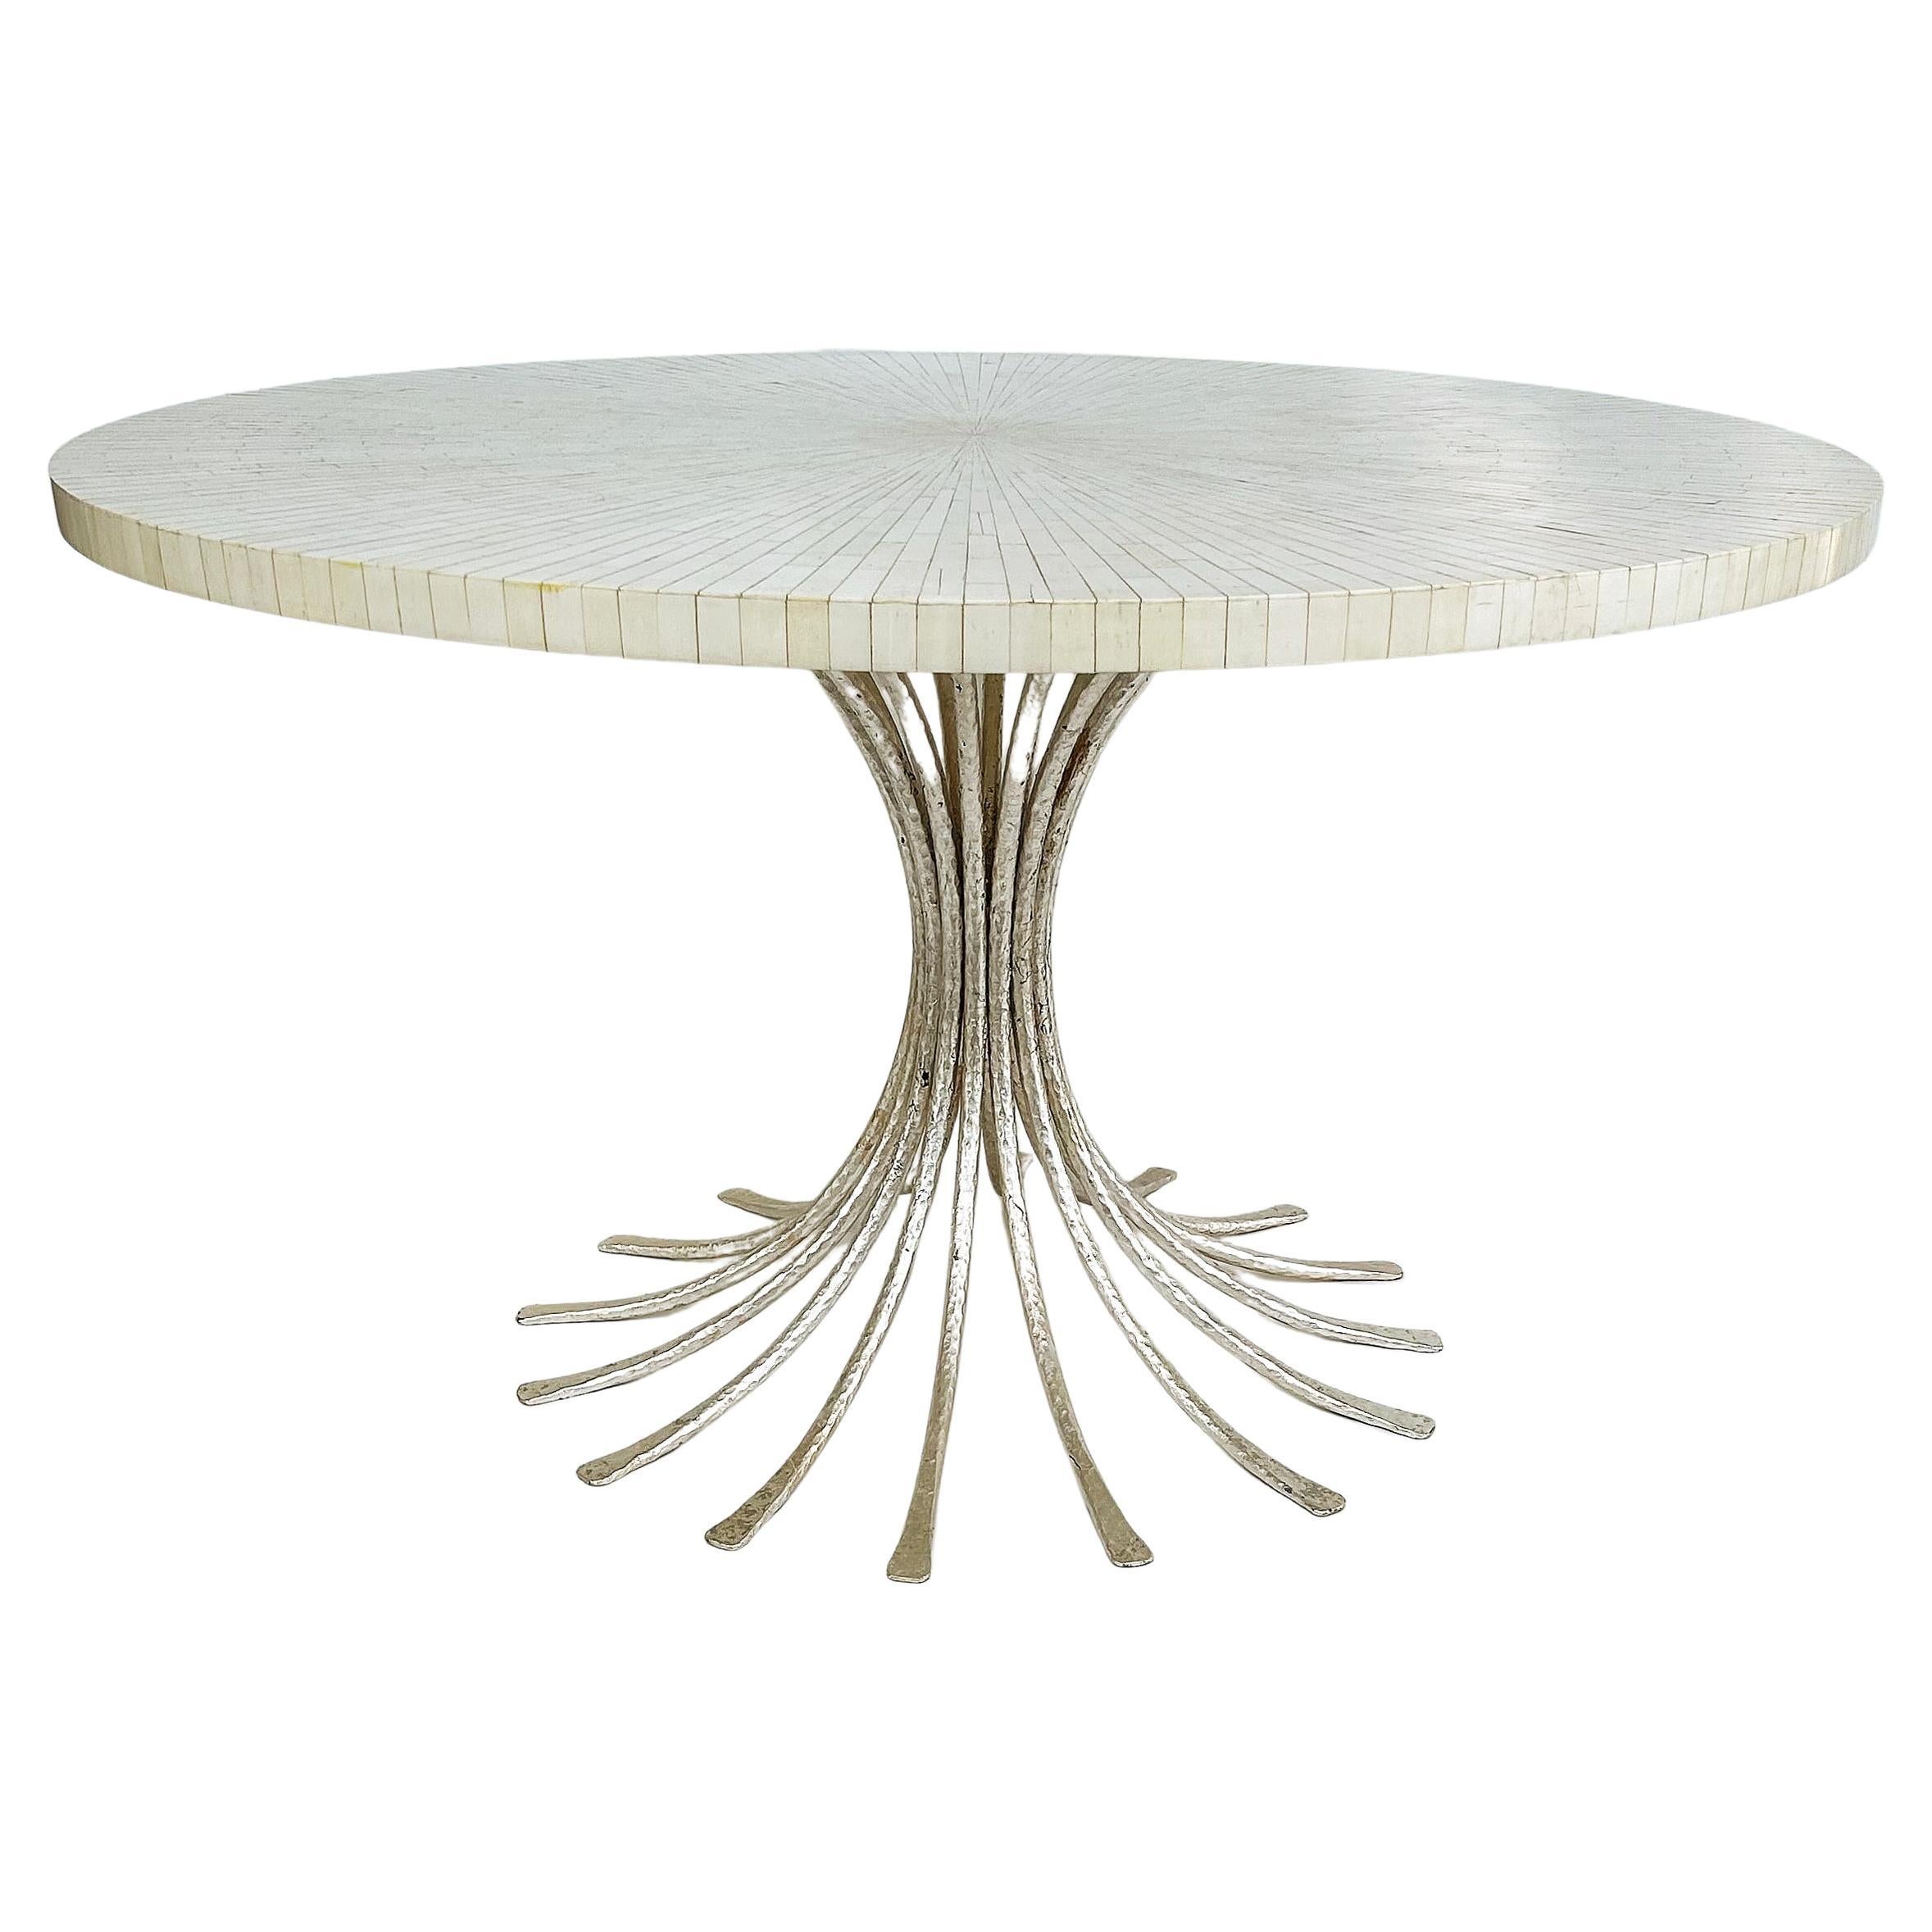 Ironies Tessellated Bone Sunburst Top Dining Table with Silver Gilt Metal Base